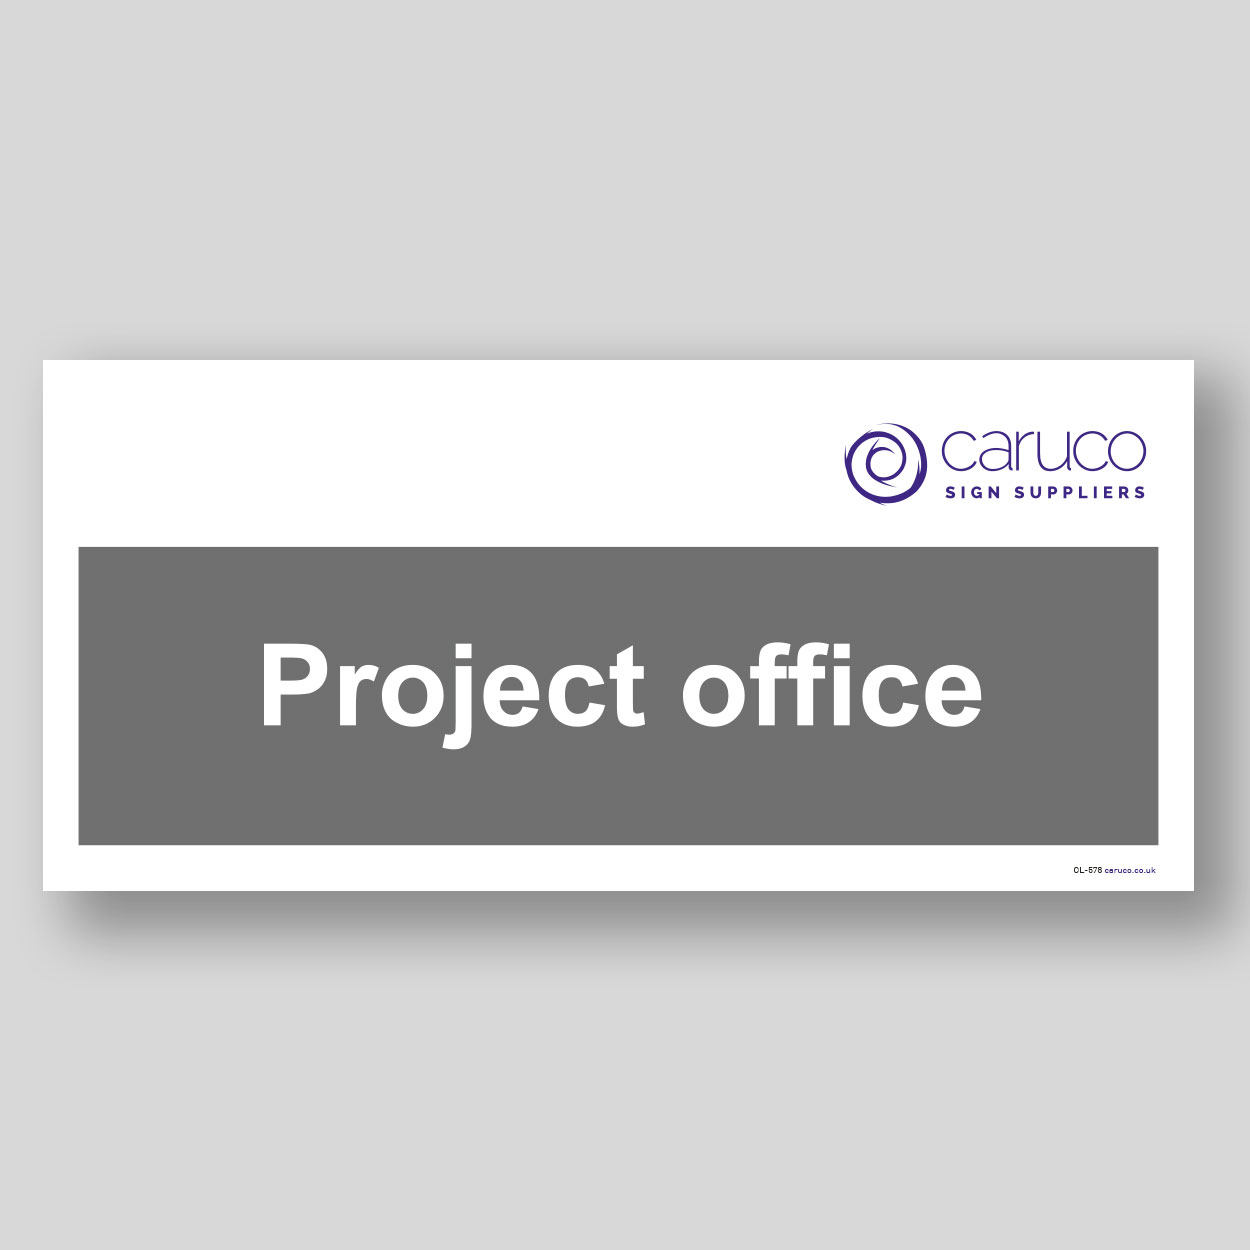 CL-578 Project office